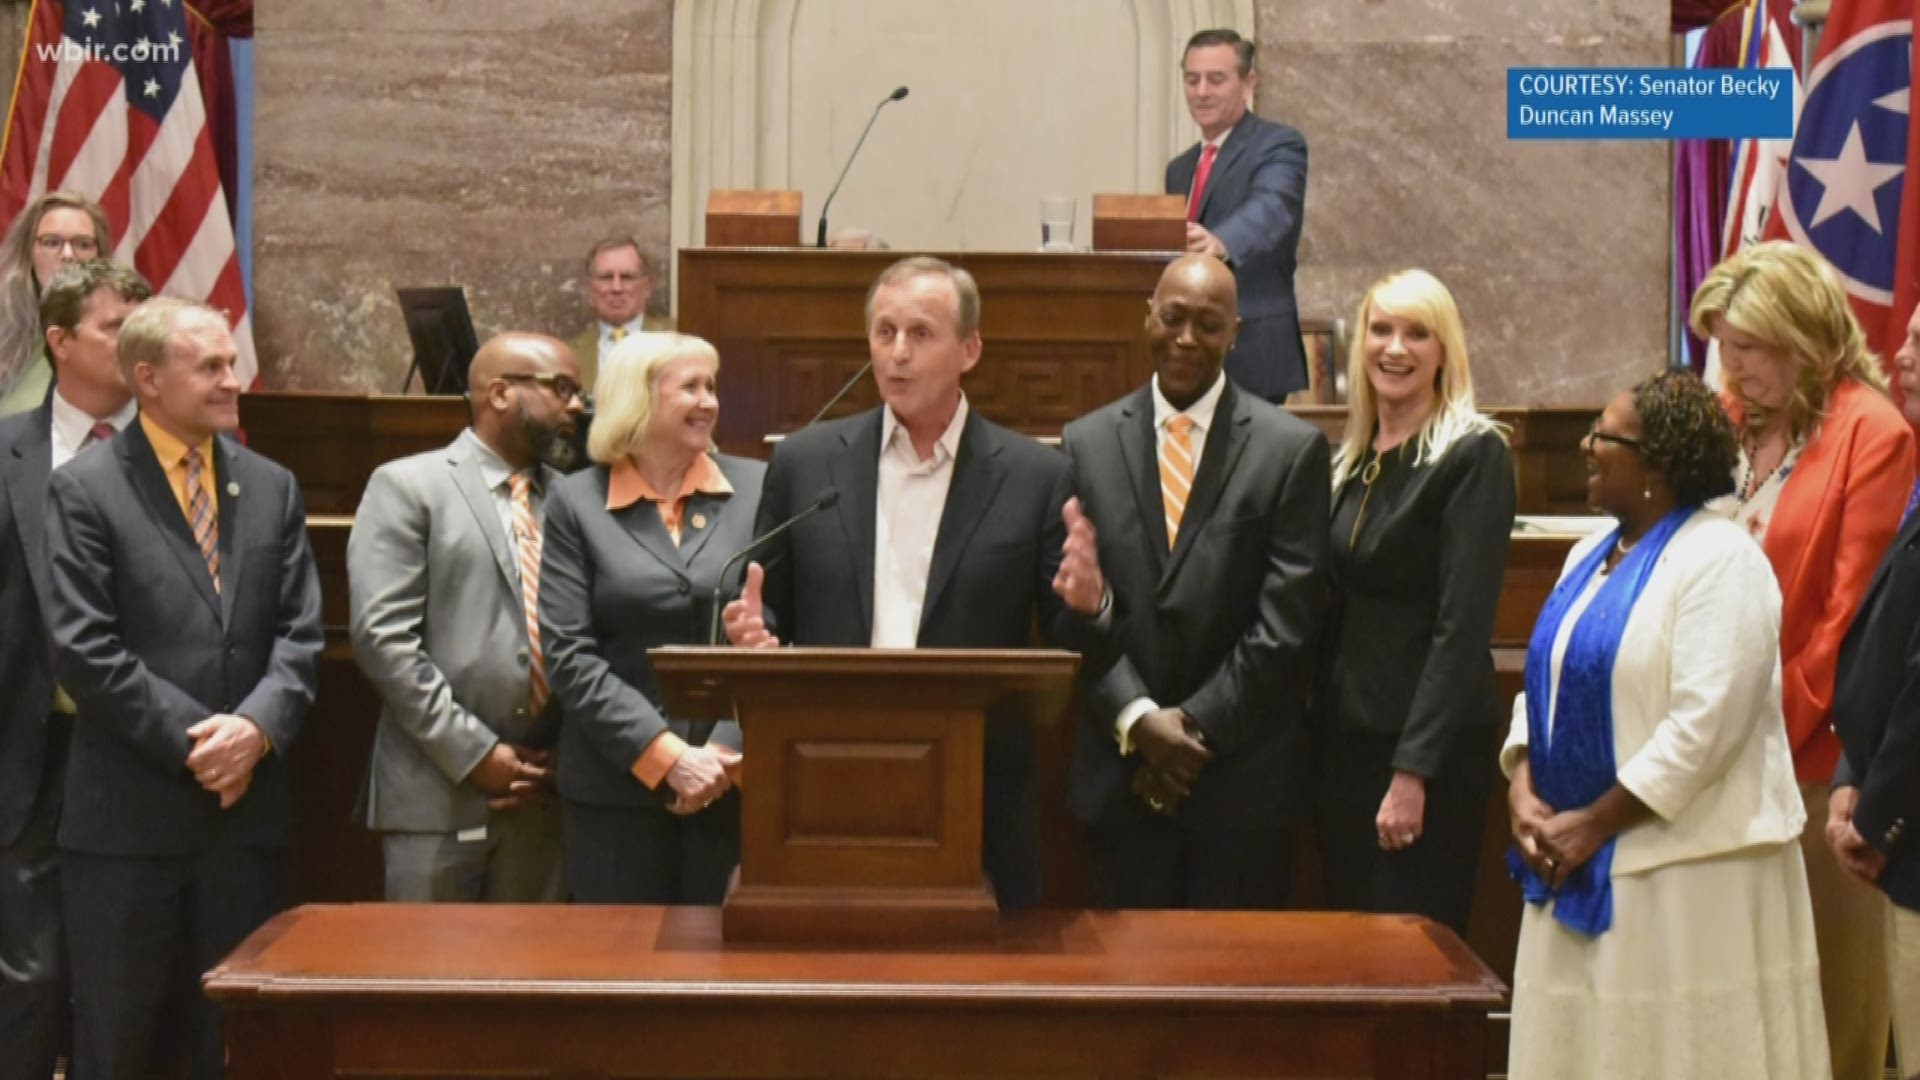 Tennessee basketball was honored as part of a joint resolution at the State Capitol.